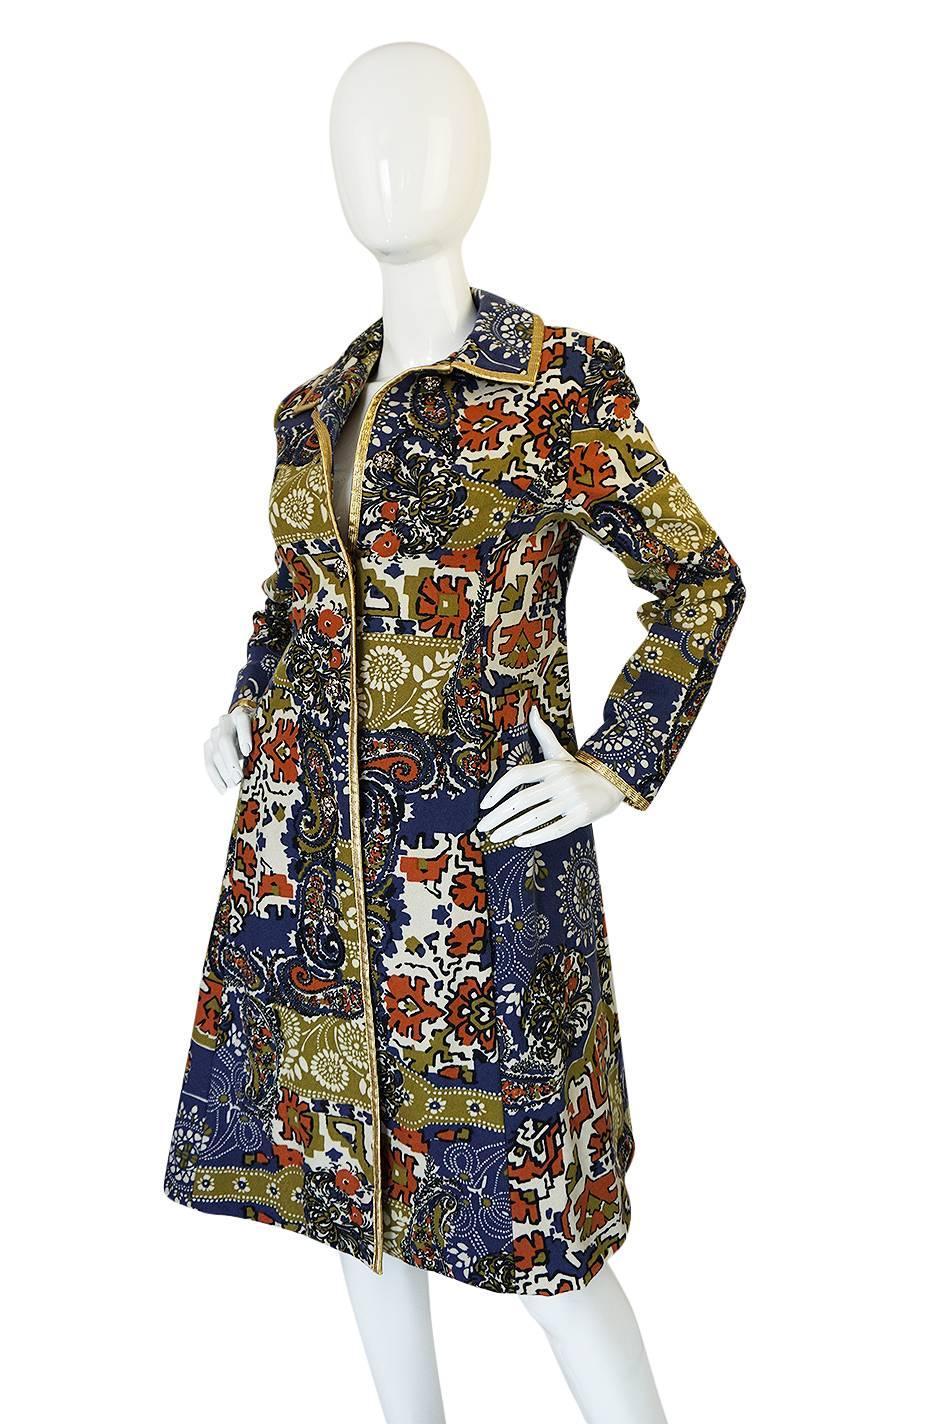 Women's 1960s Gold Trimmed Felted Wool Print Malcolm Starr Coat